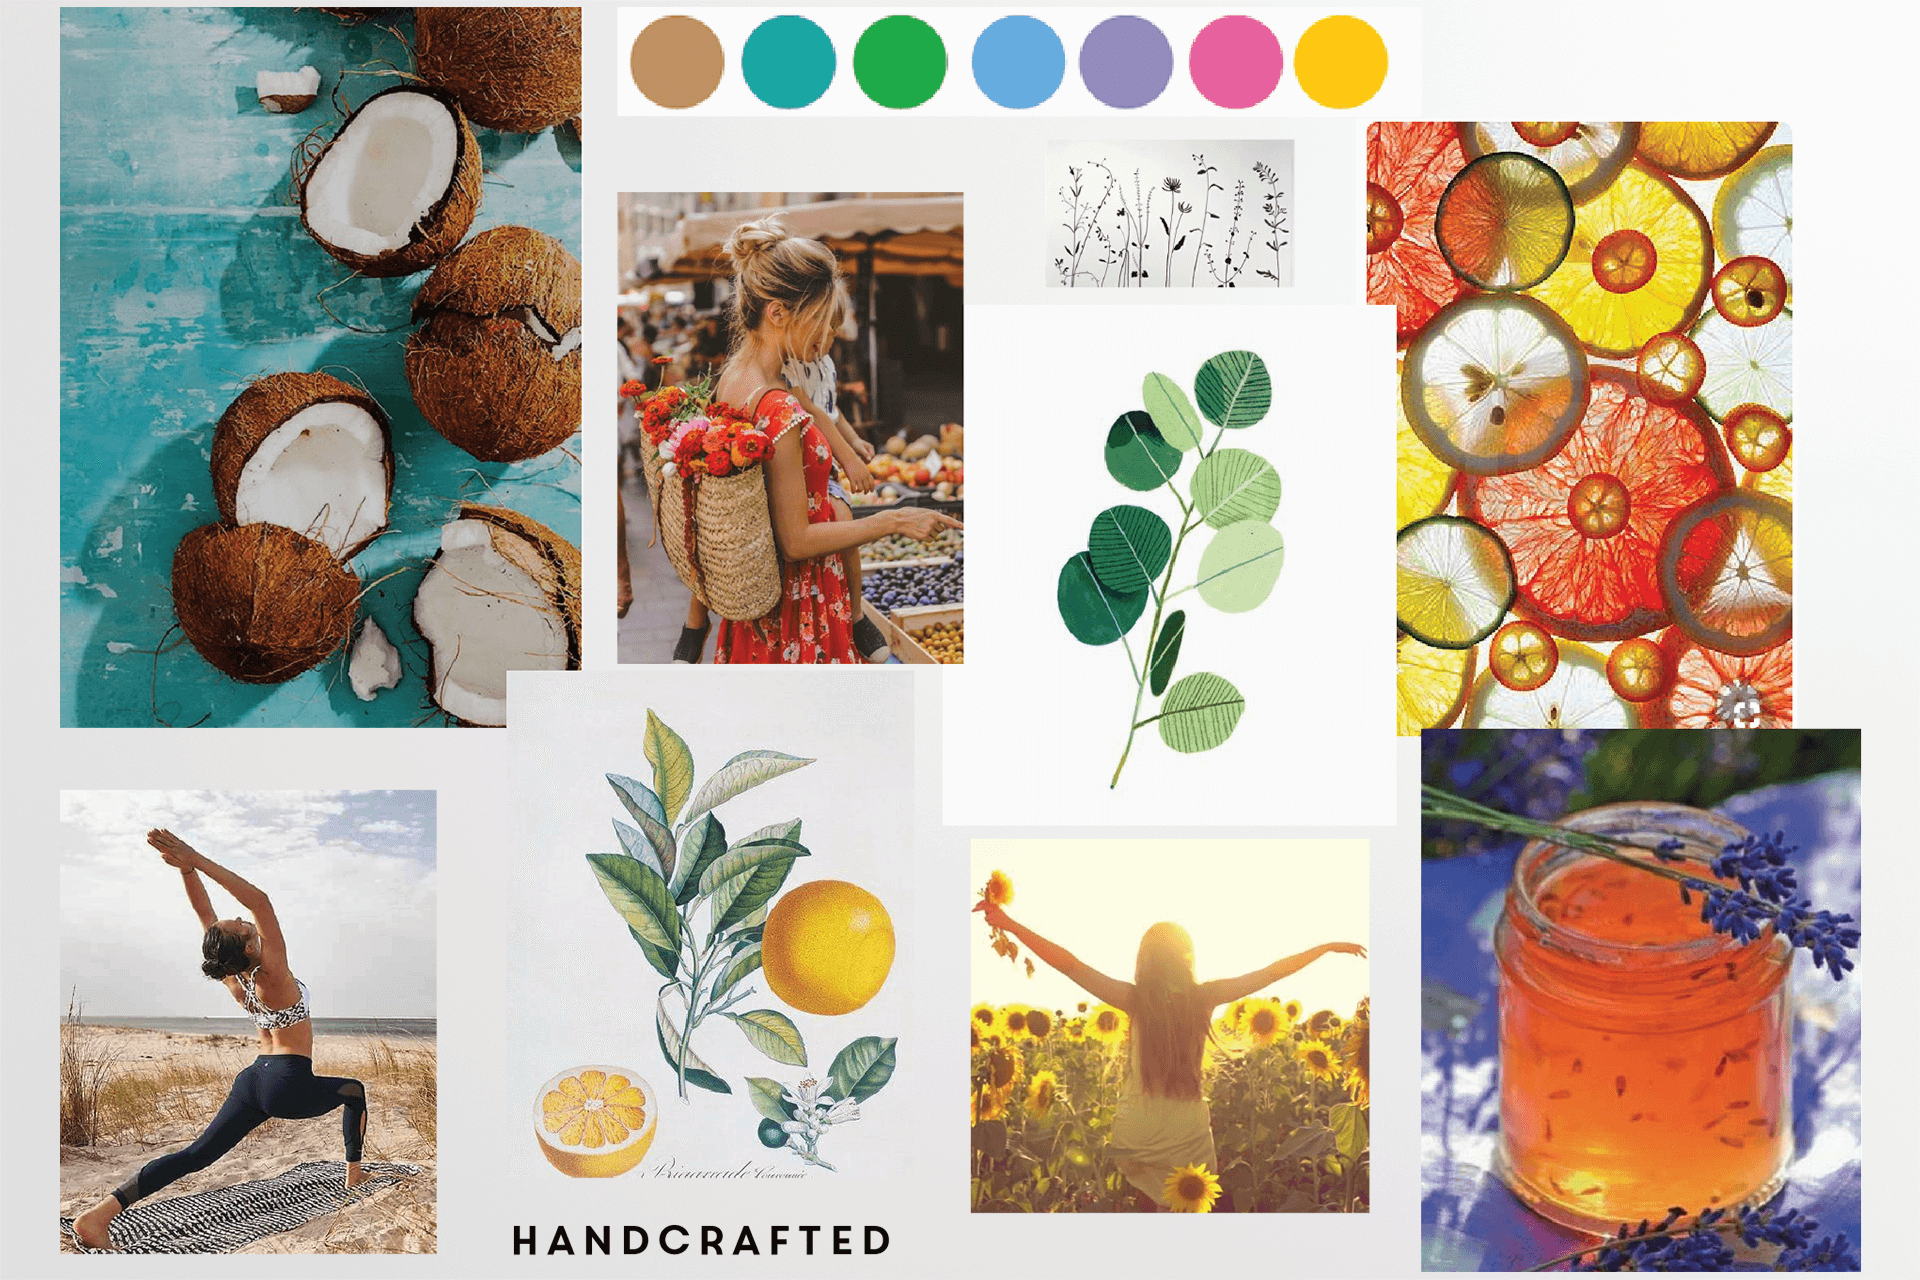 Collection of images and colors that were the inspiration for the redesign